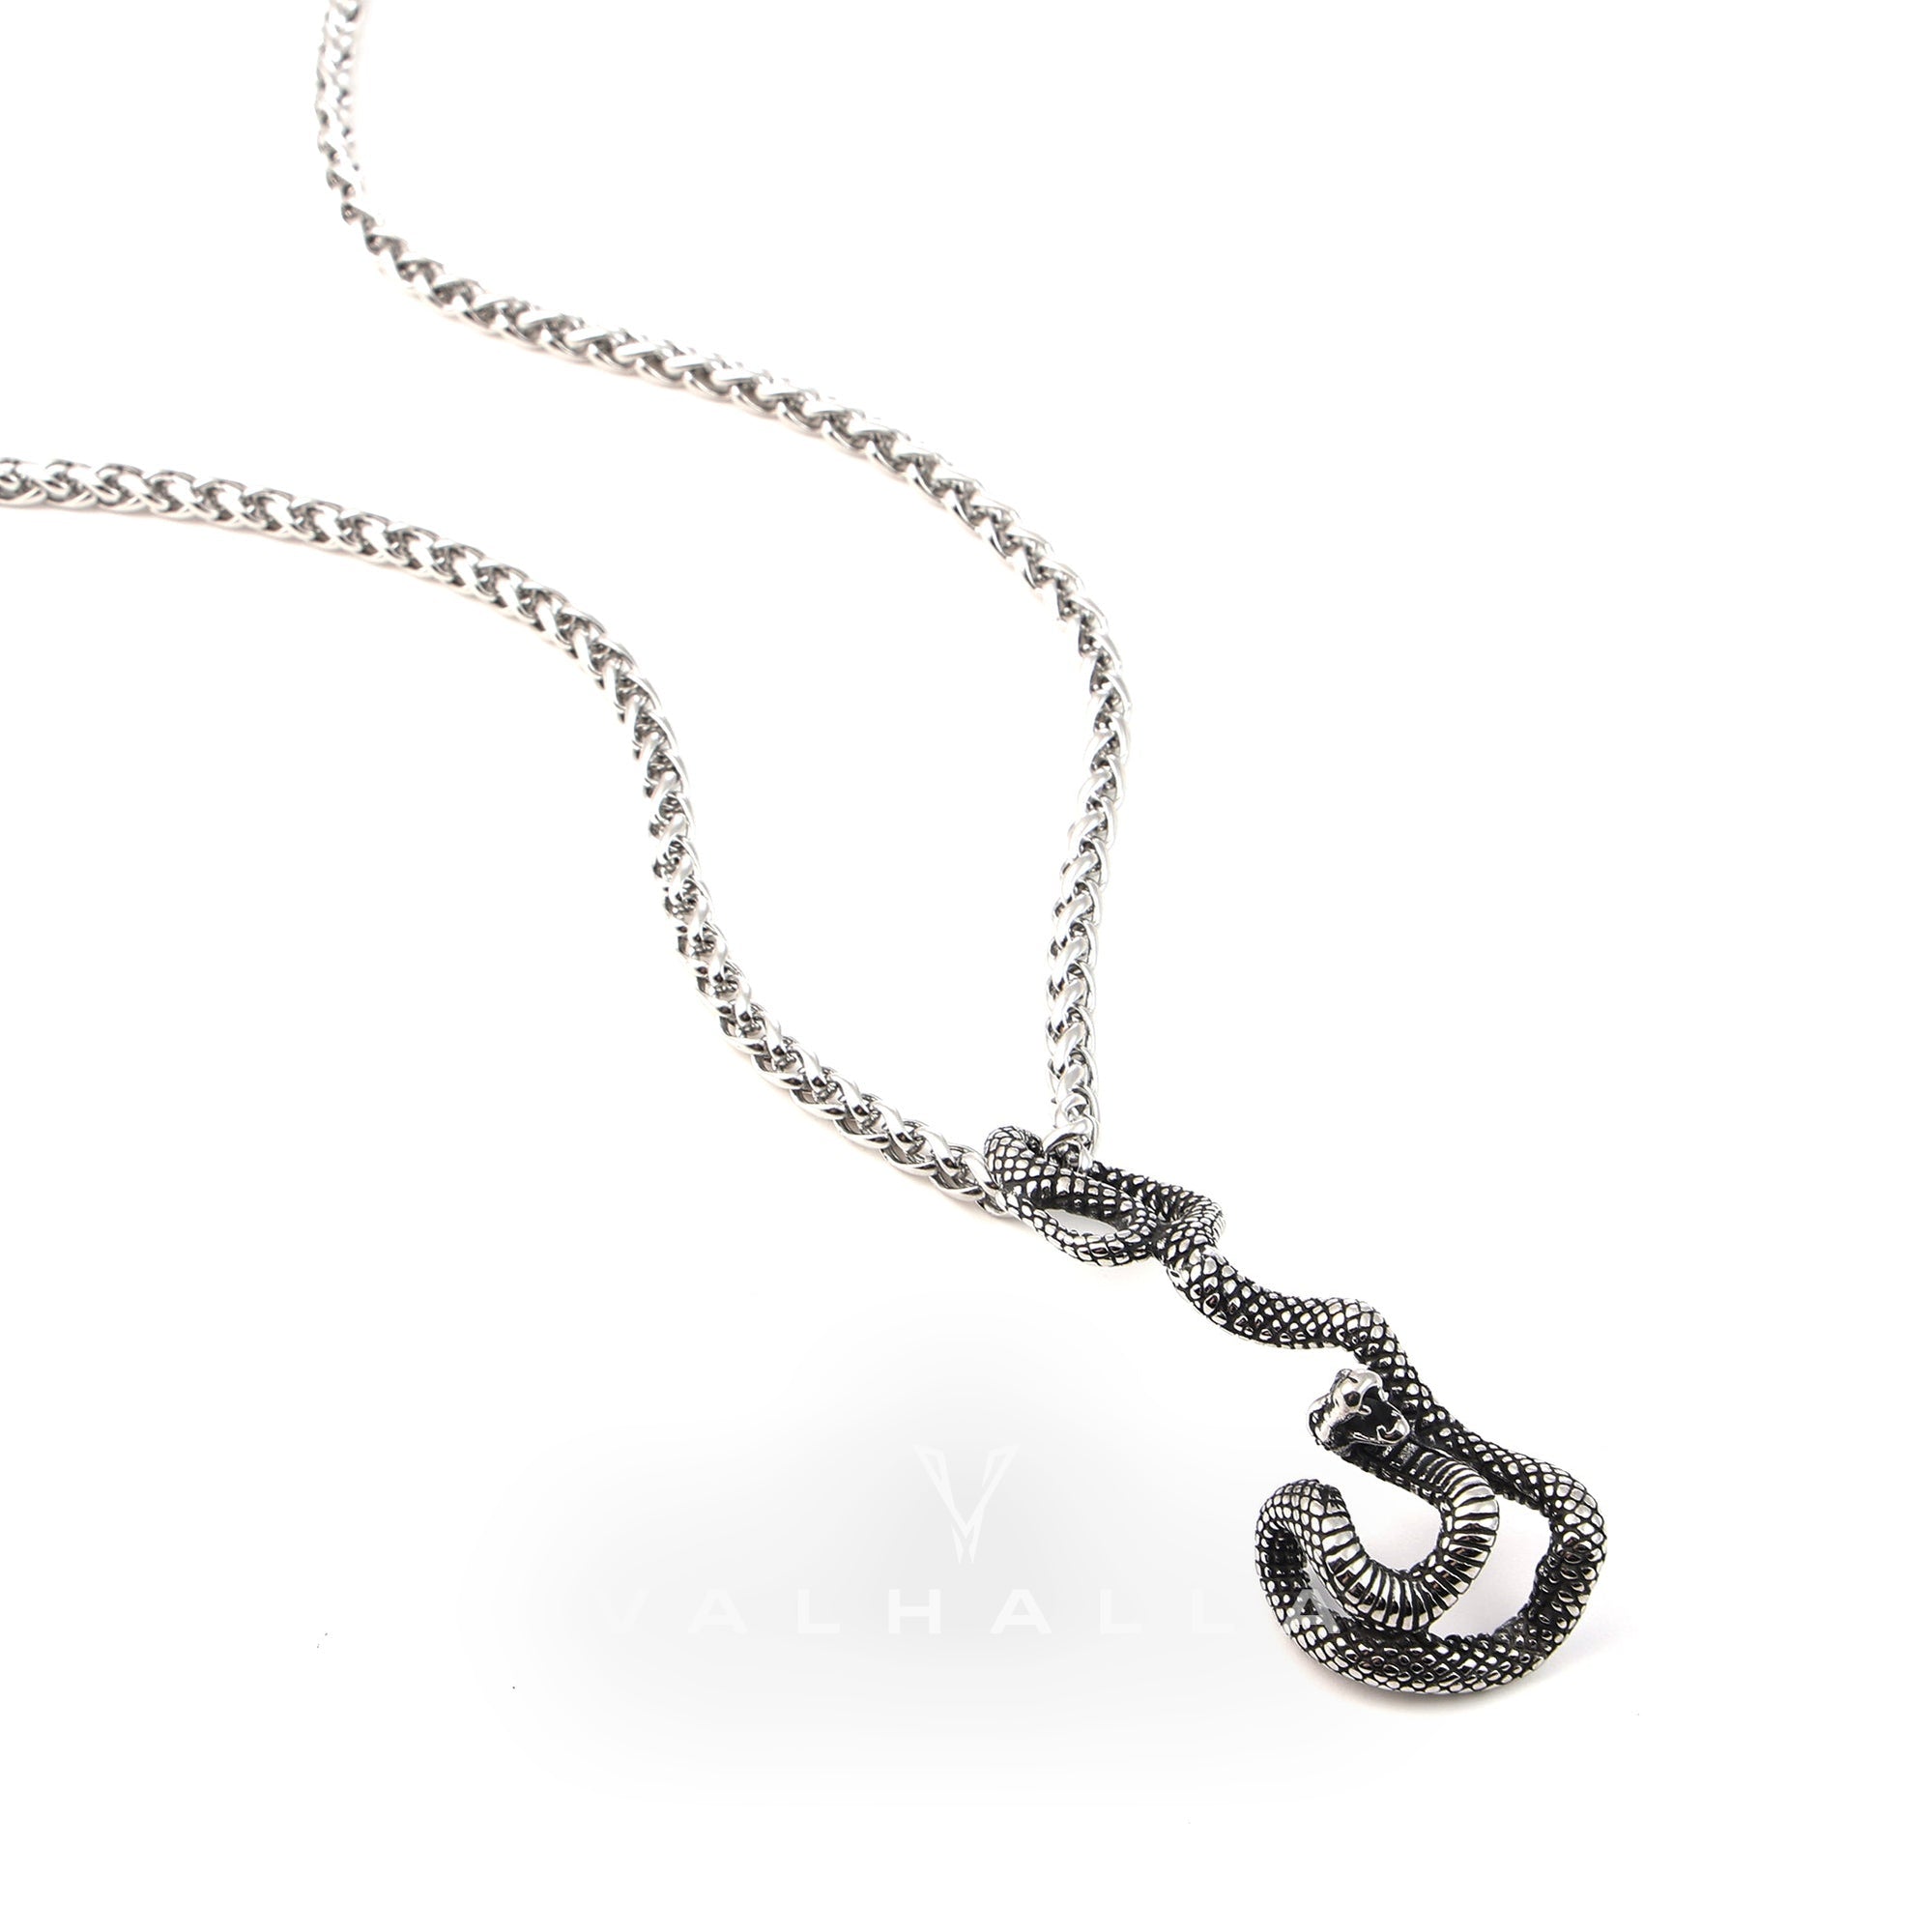 Coiled Snake Stainless Steel Pendant & Chain